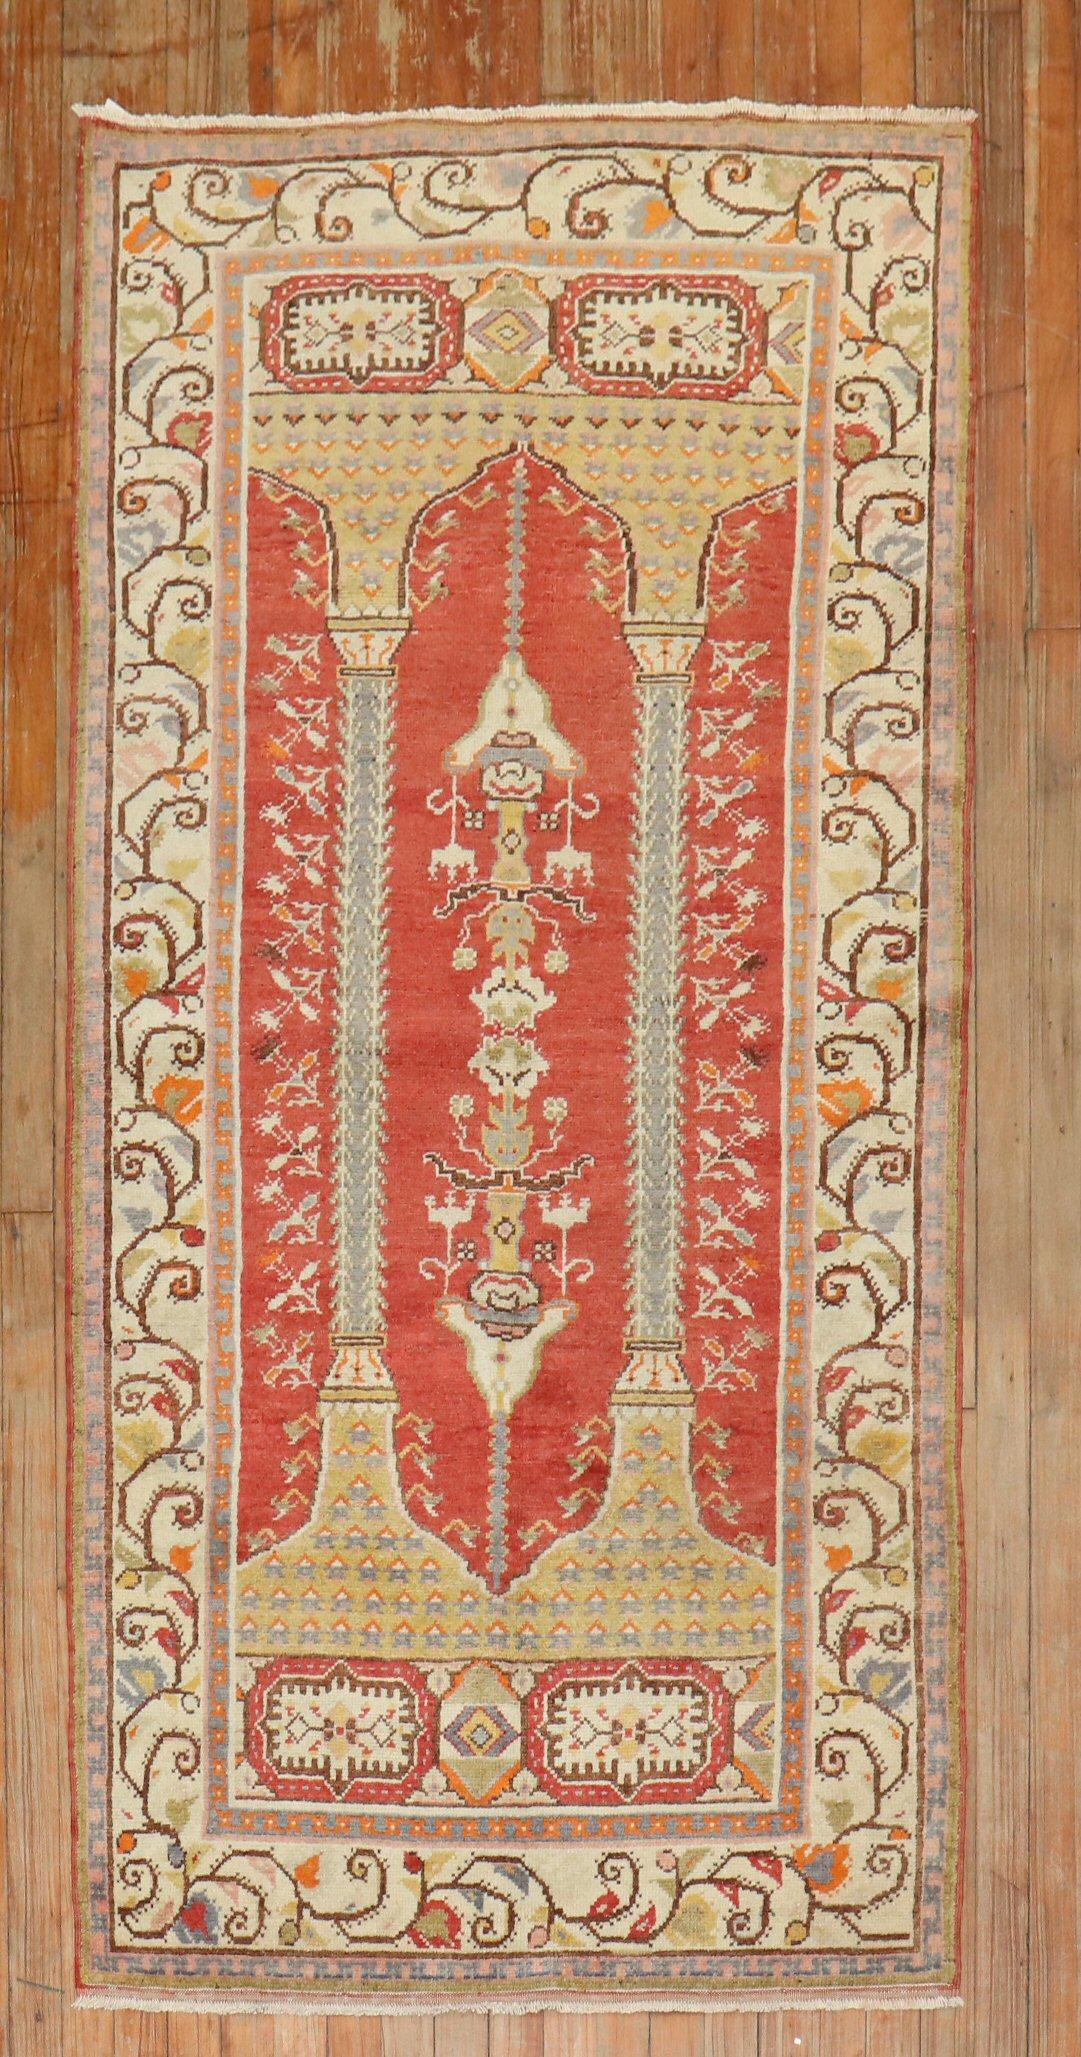 Midcentury Turkish rug with a double column scroll prayer motif on red field

Size: 3'3